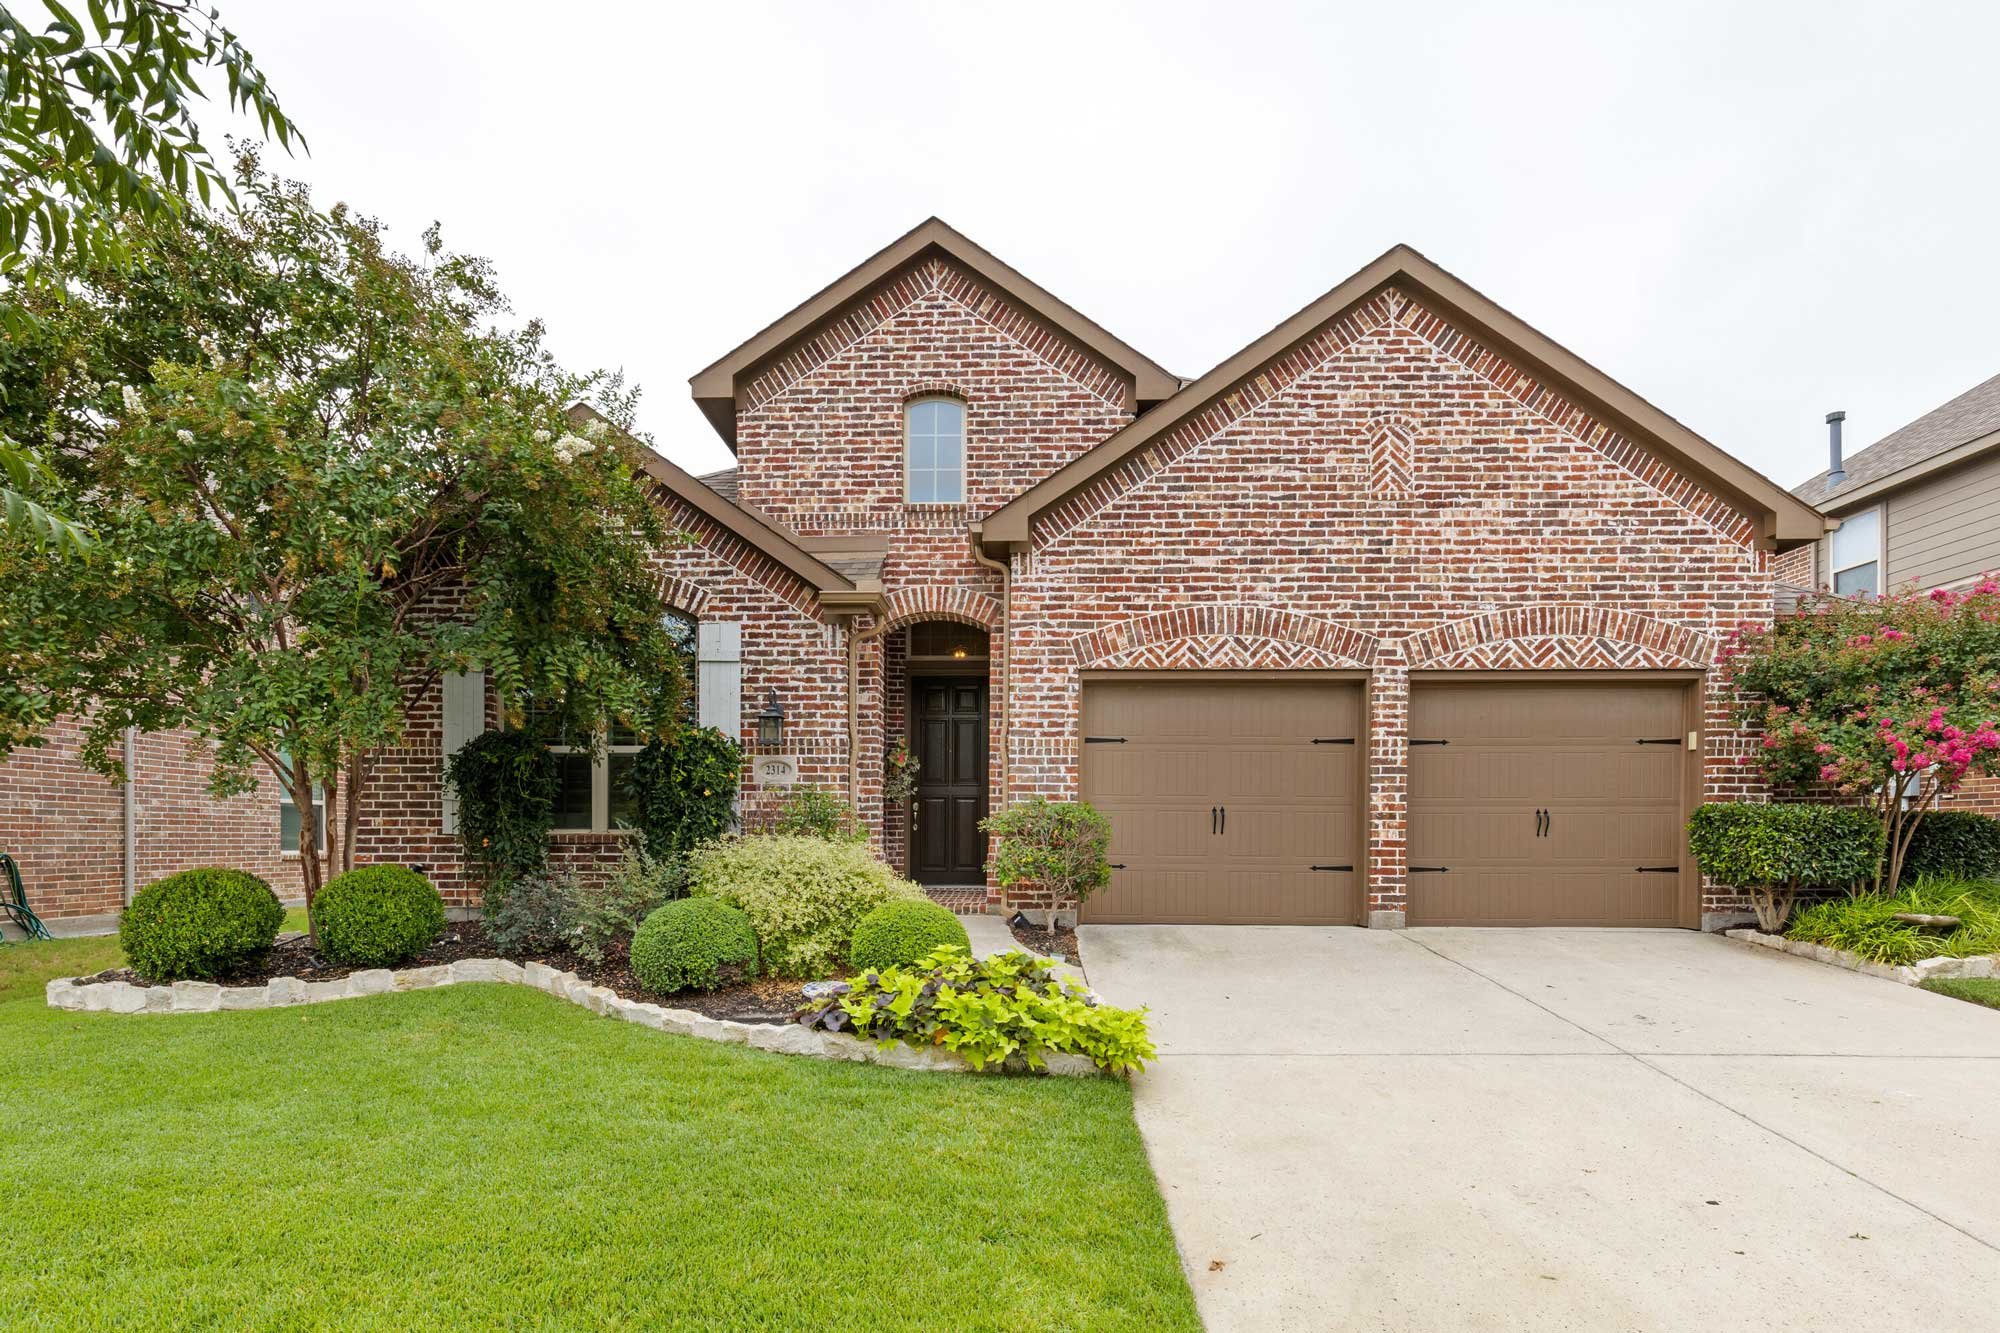 This gorgeous home at 2314 Houston Drive is on an interior lot of Liberty, one of the best developments currently in Collin County